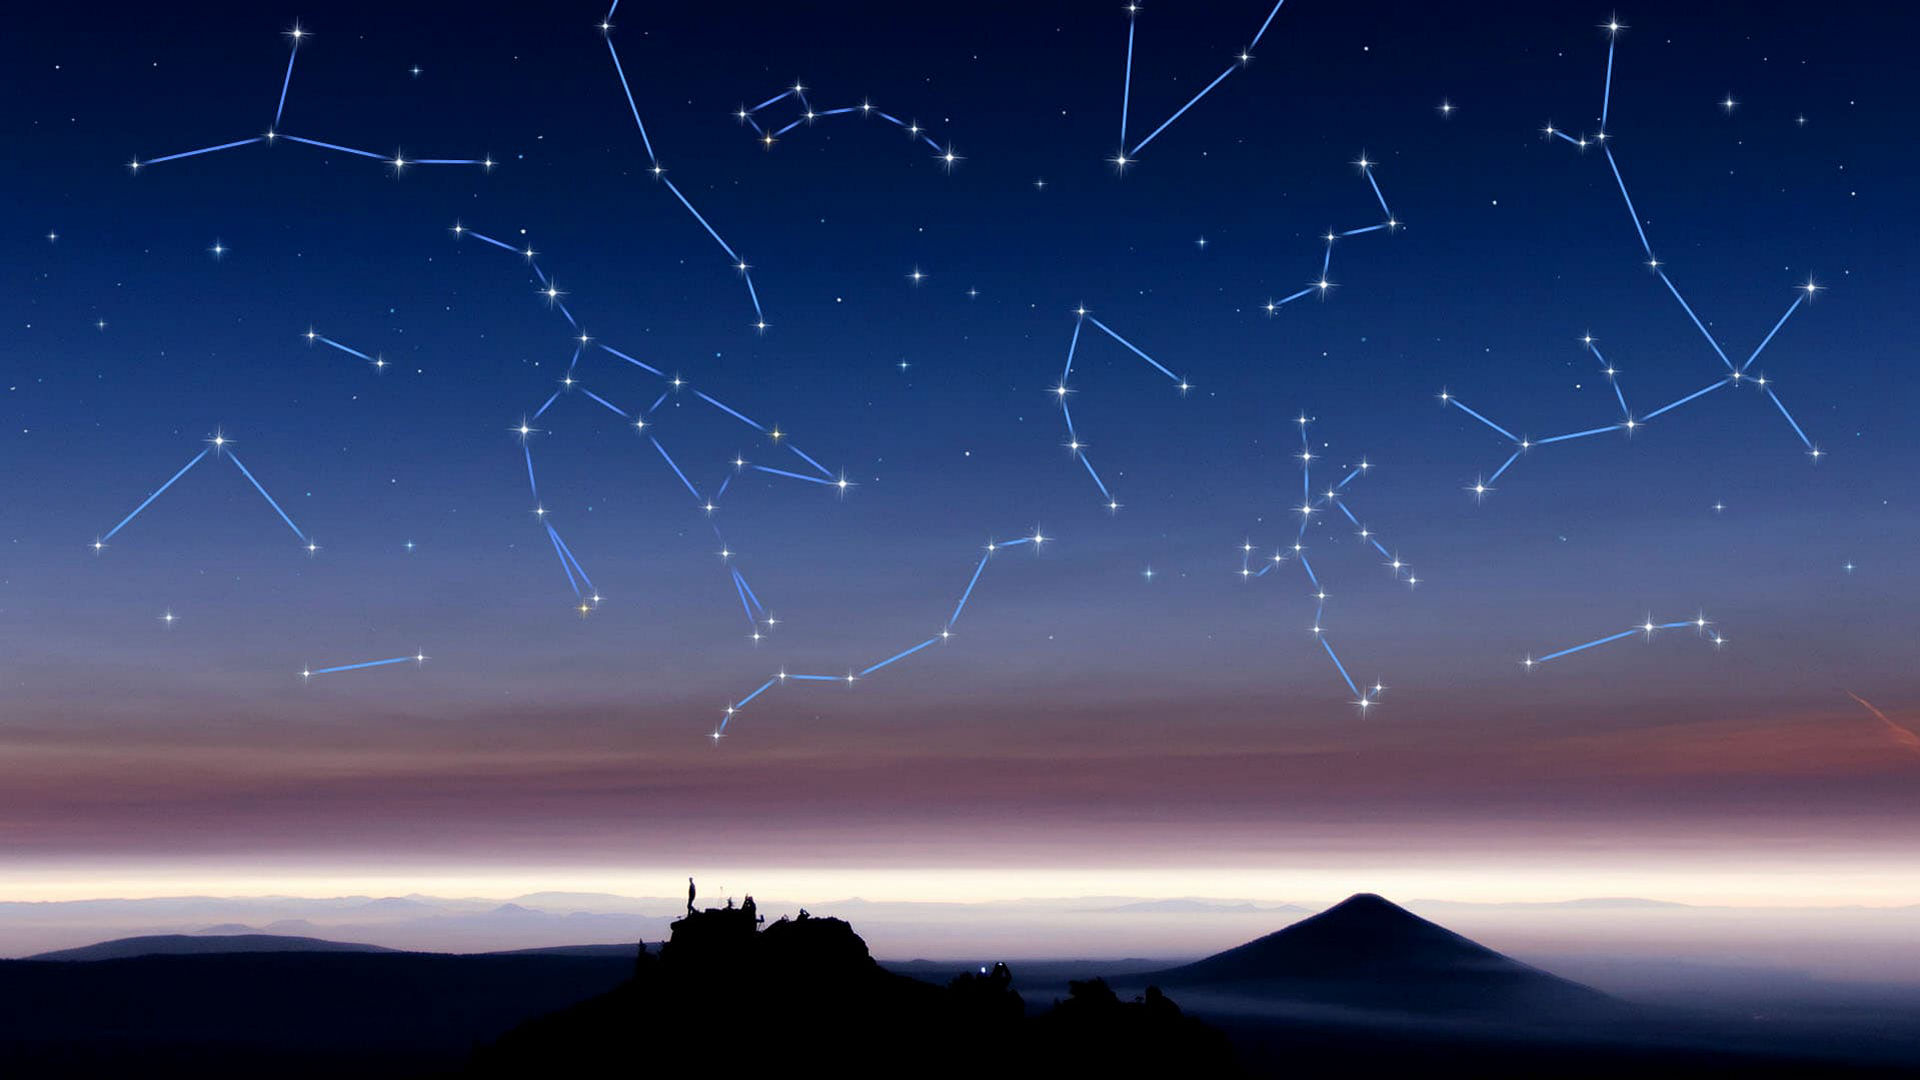 Constellations in the sky